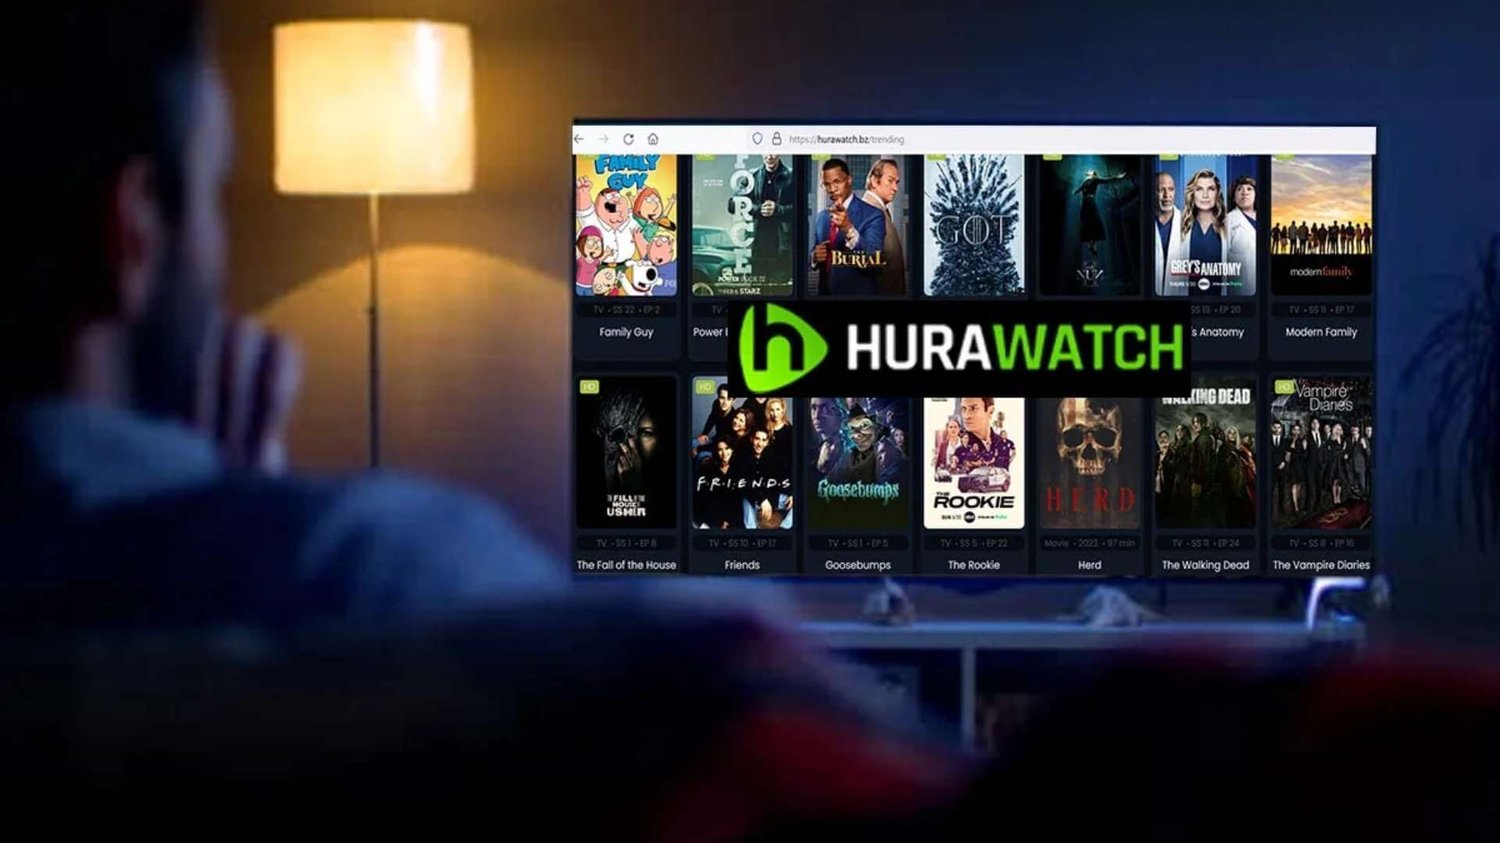 What is Hurawatch